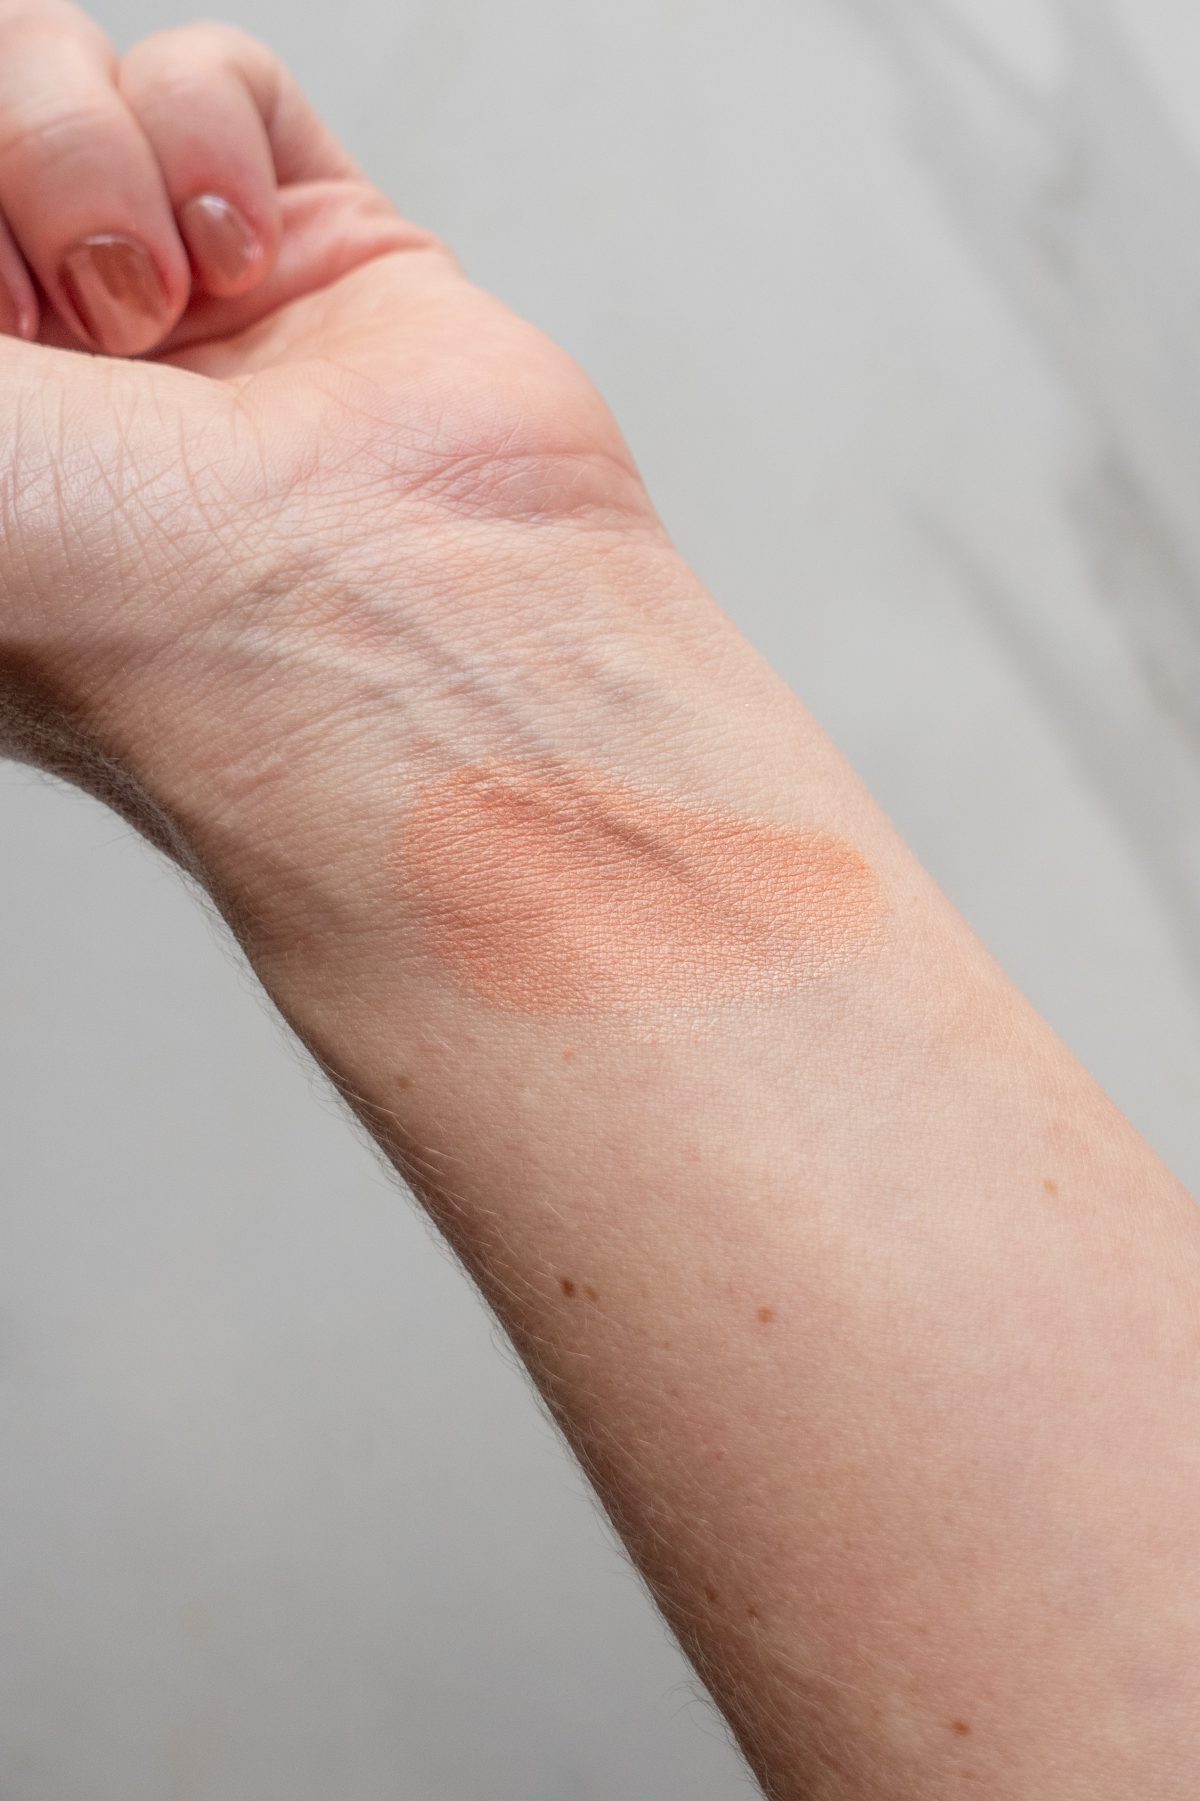 Milani Baked Blush Review and Swatches - Luminoso Swatch